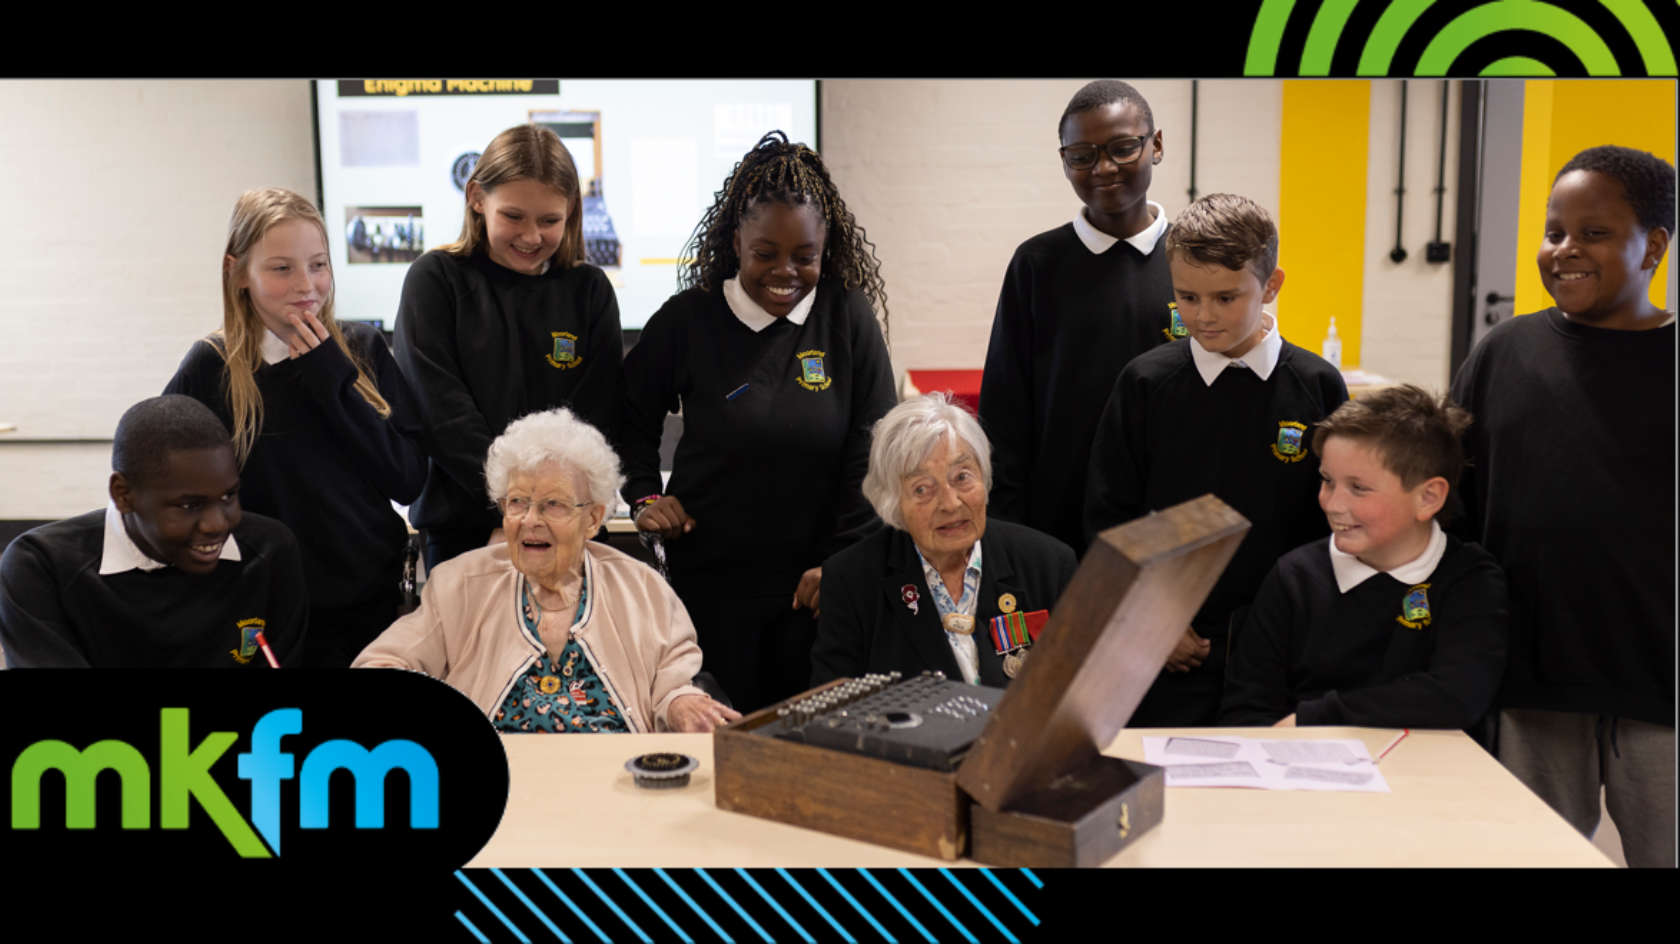 Bletchley Park’s new state-of-the art Learning Centre welcomes Veterans and first learners on the anniversary of D-Day – MKFM 106.3FM